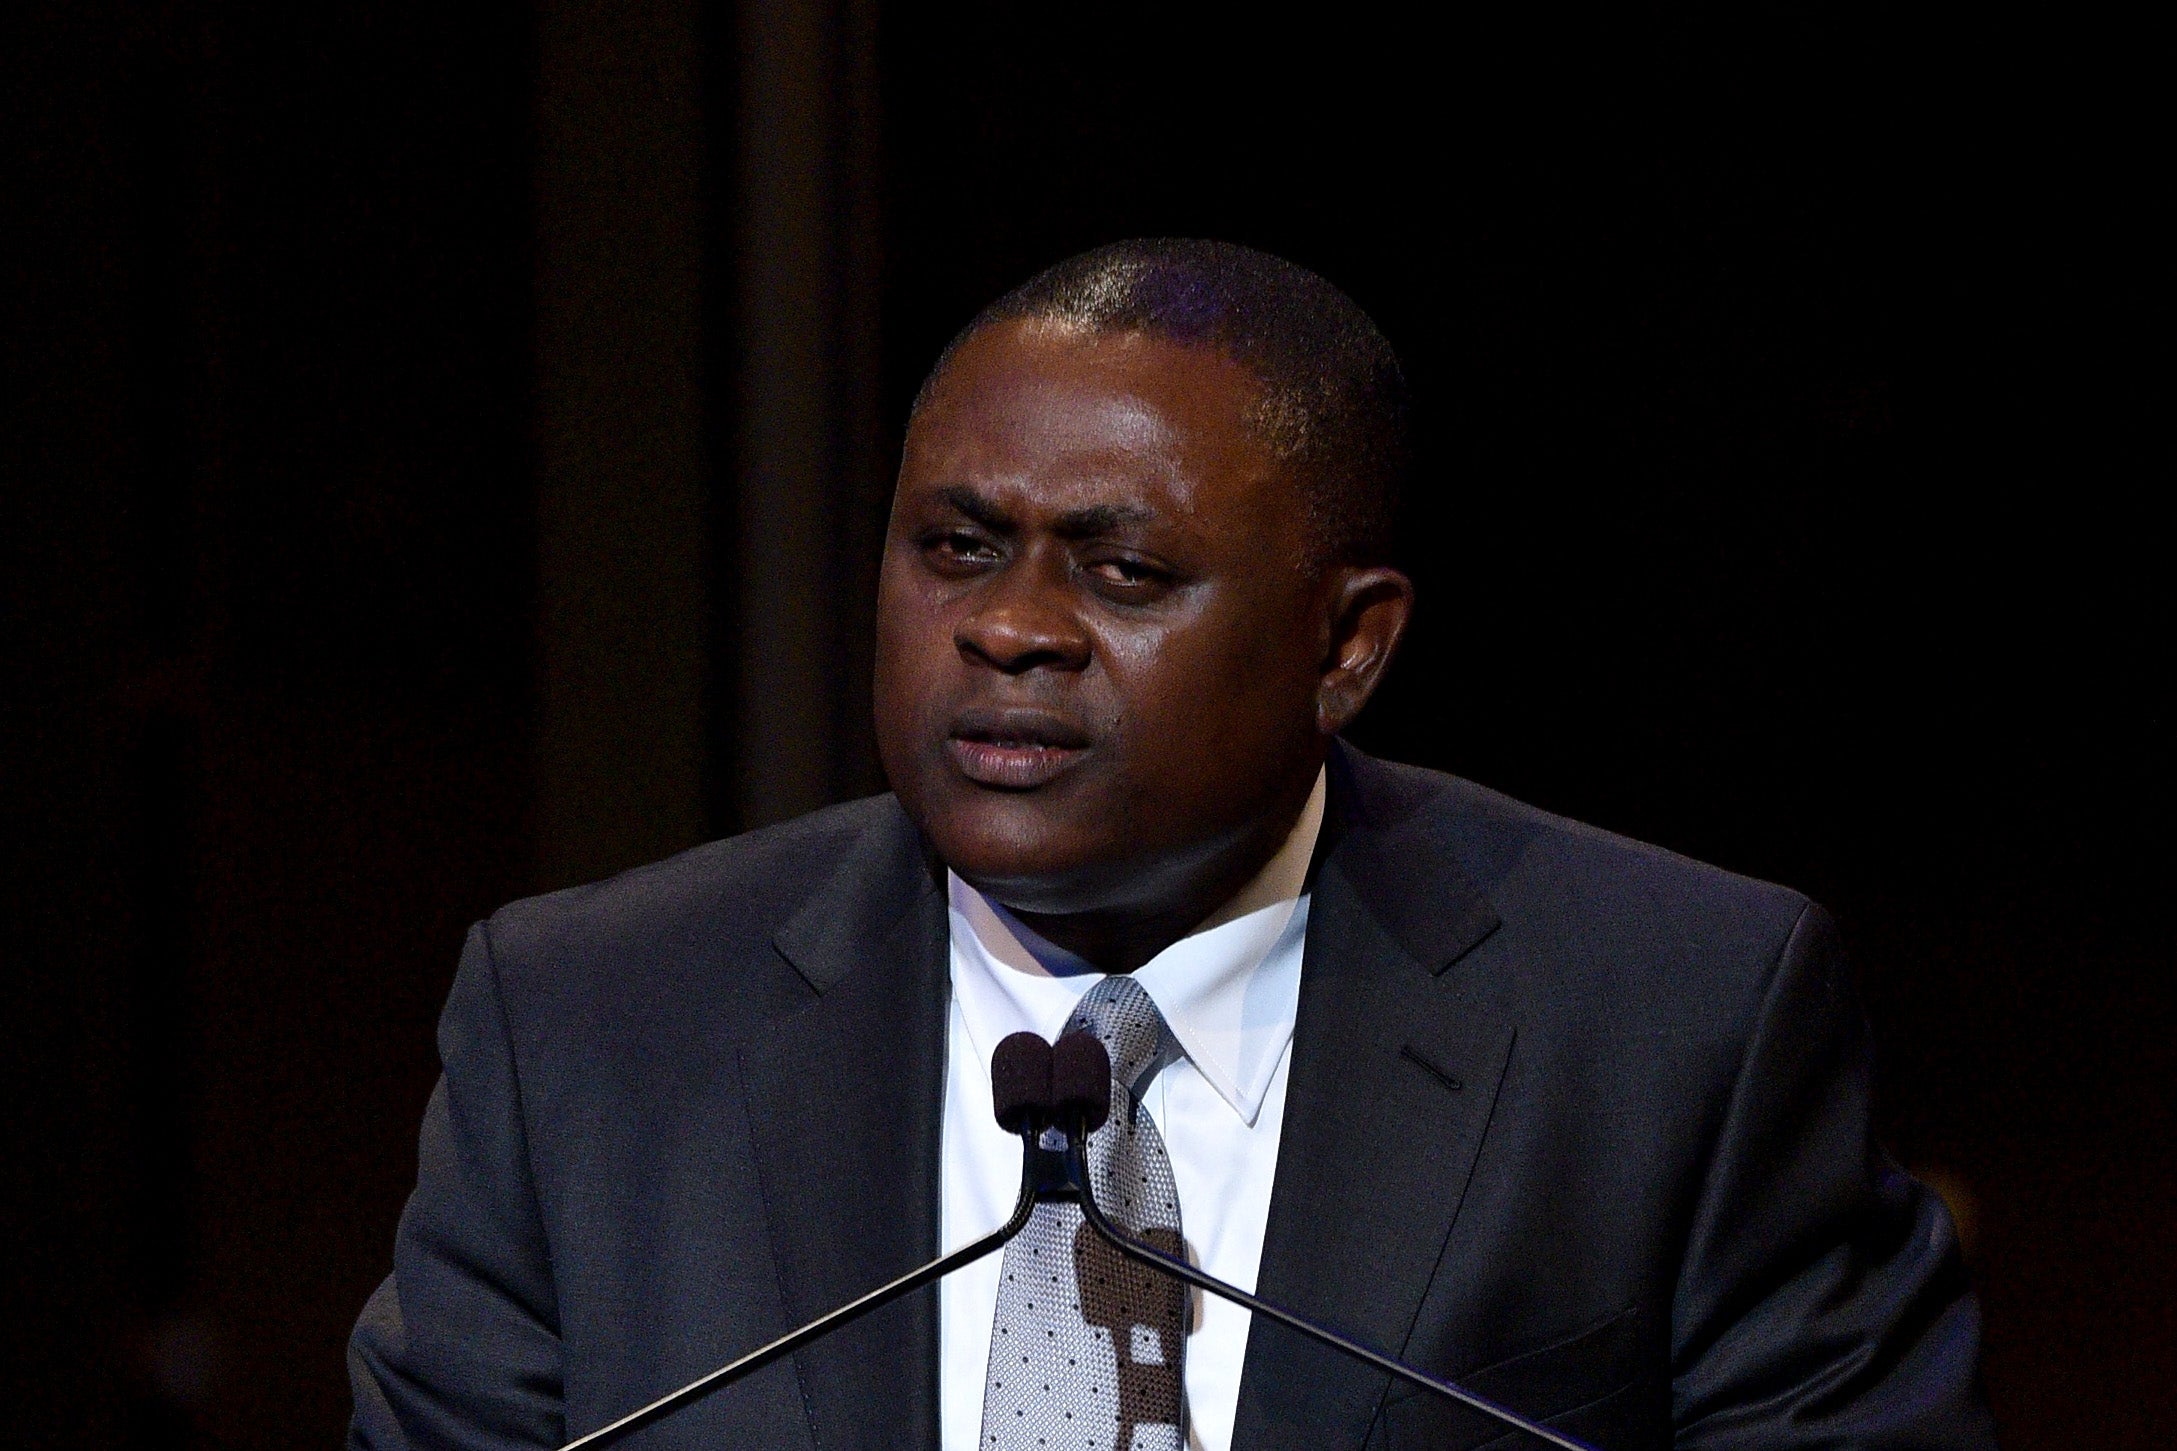 Bennet Omalu speaking at an event in New York City on Nov. 5, 2015.